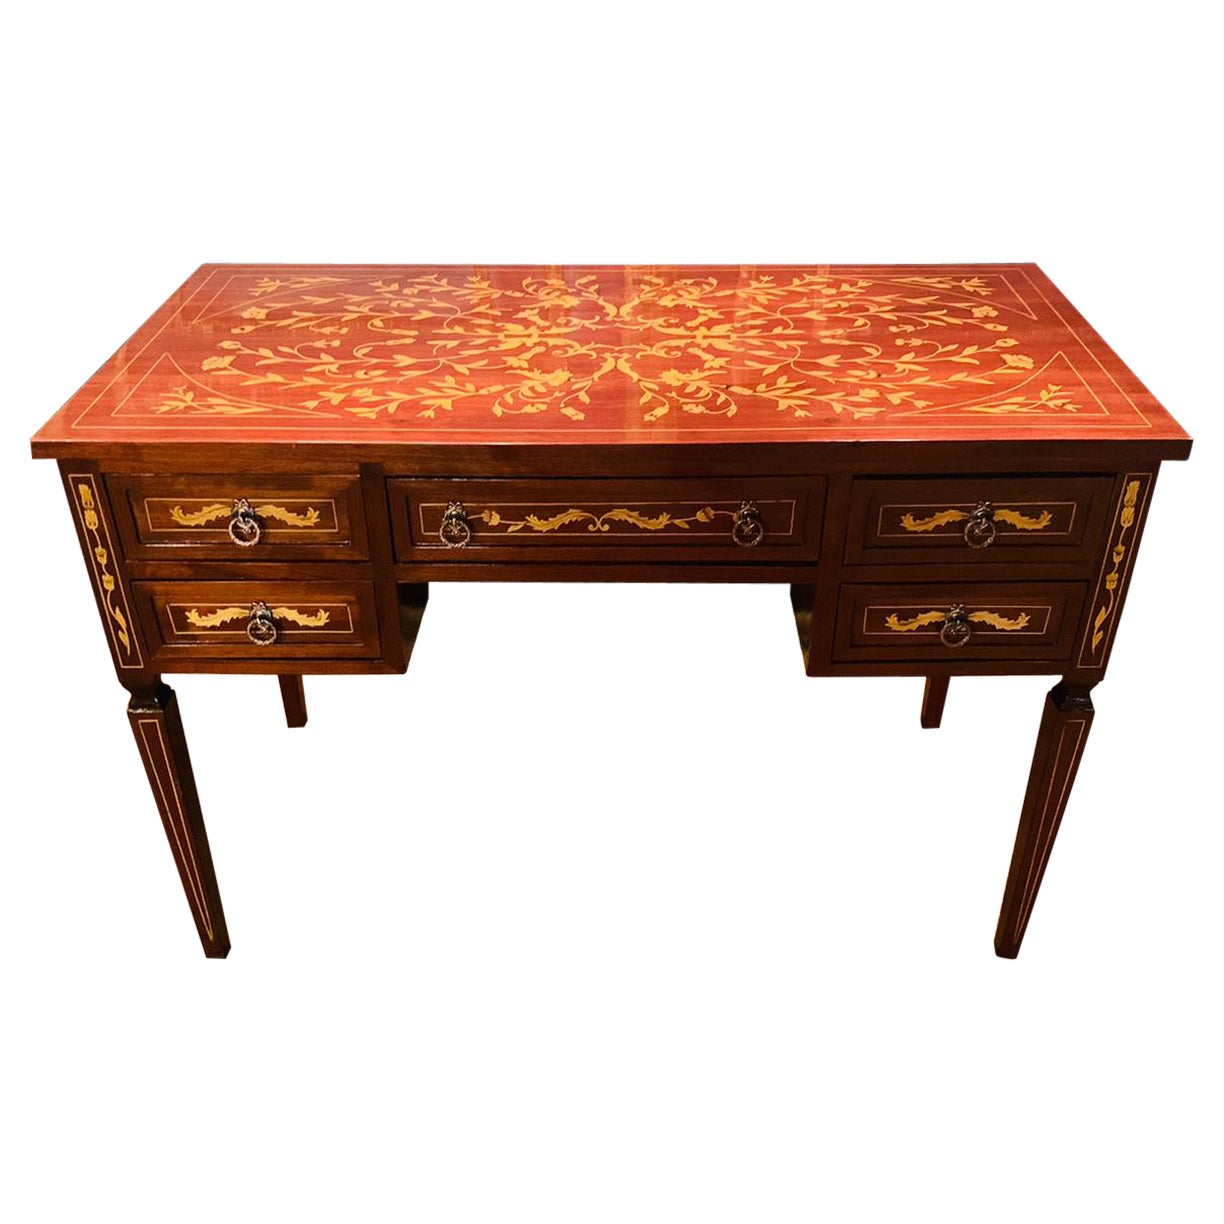 20th Century Classic Desk in the antique Style of Classicism with Inlays 